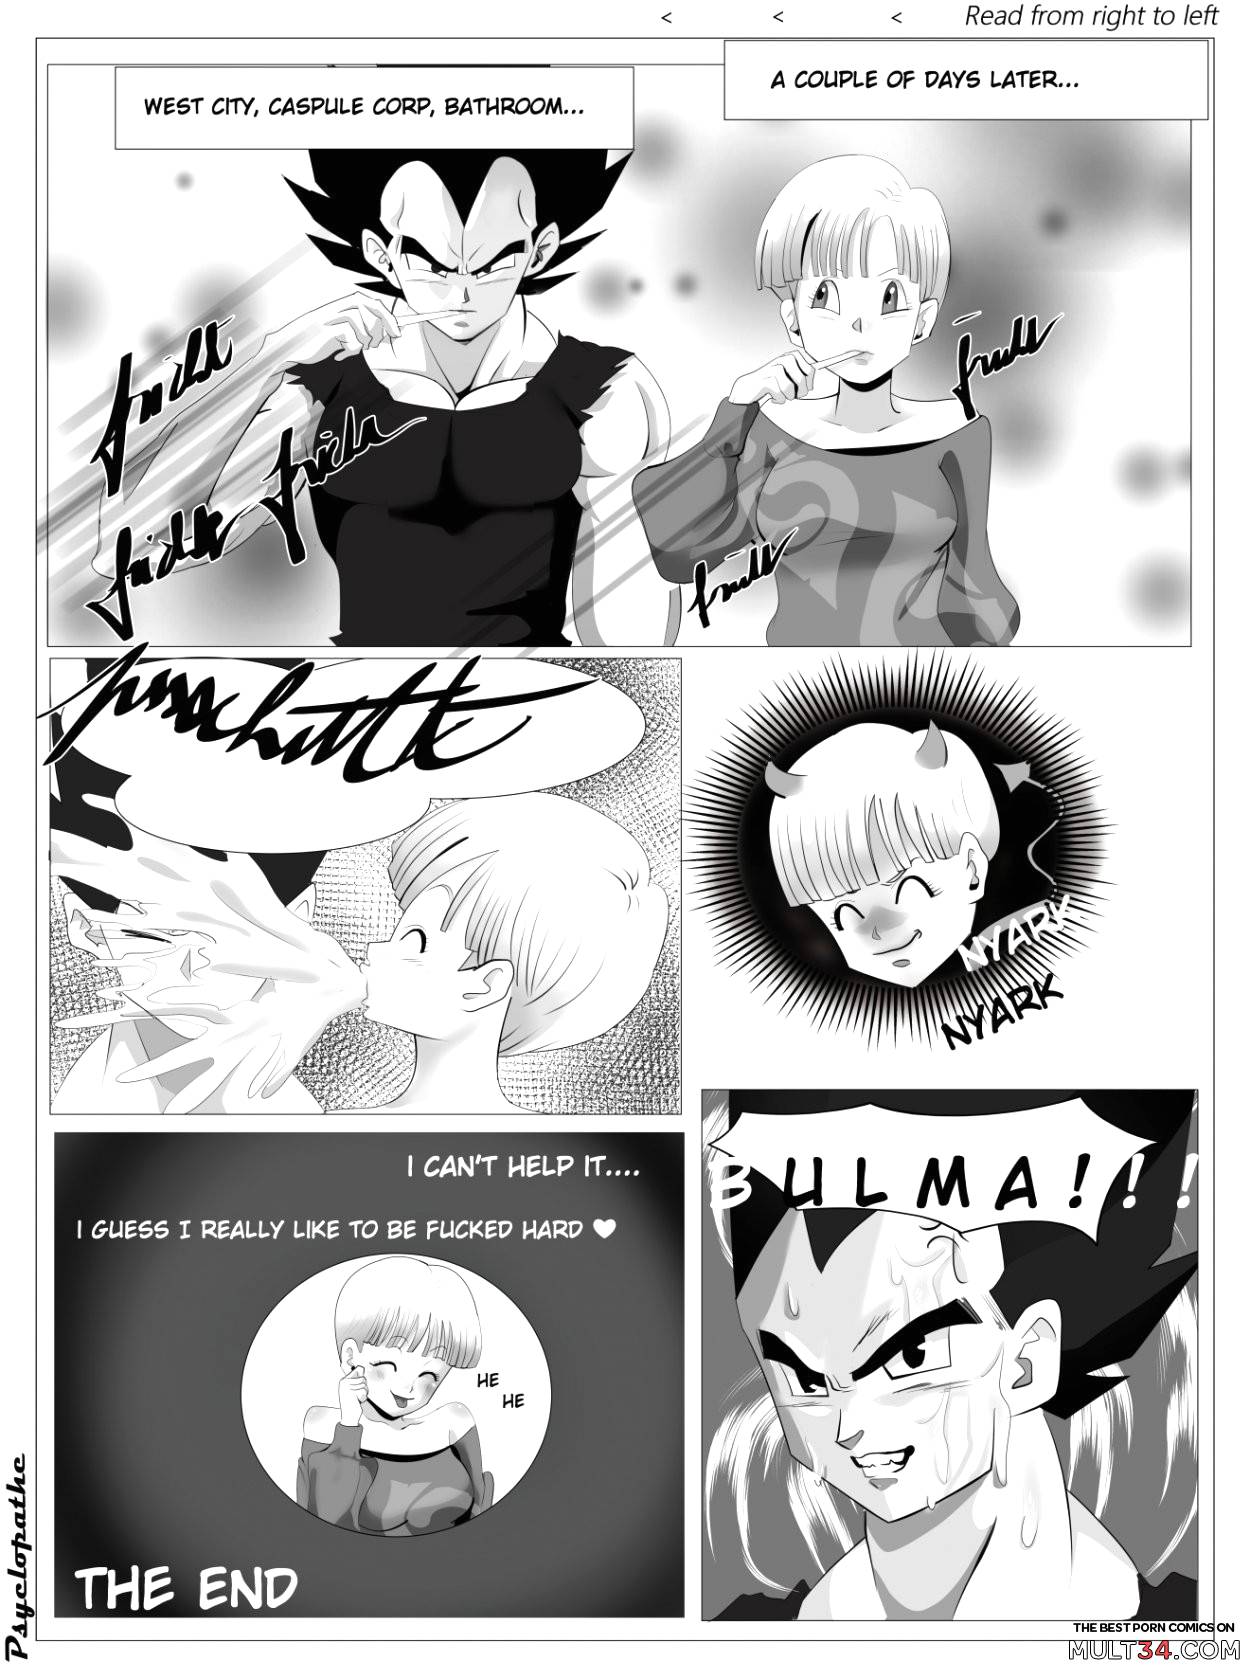 I like it rough page 6